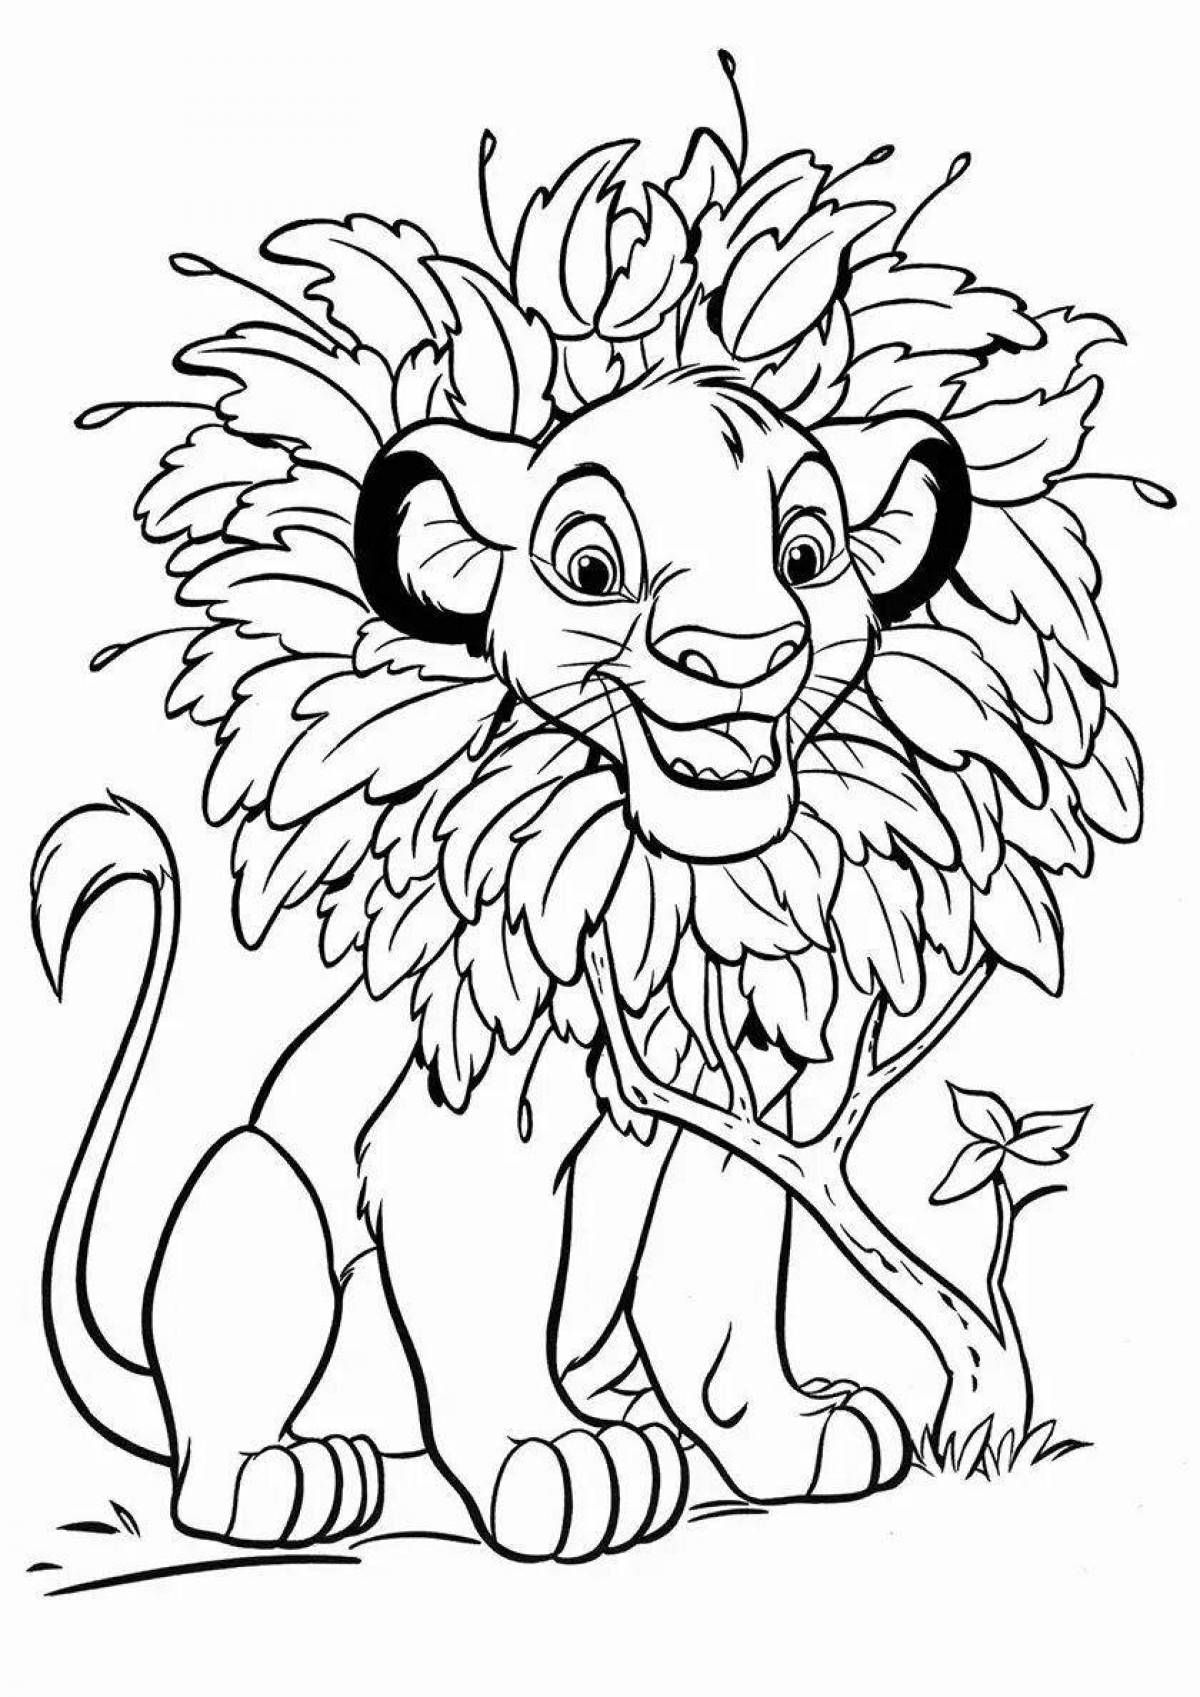 Fun coloring of a lion cub